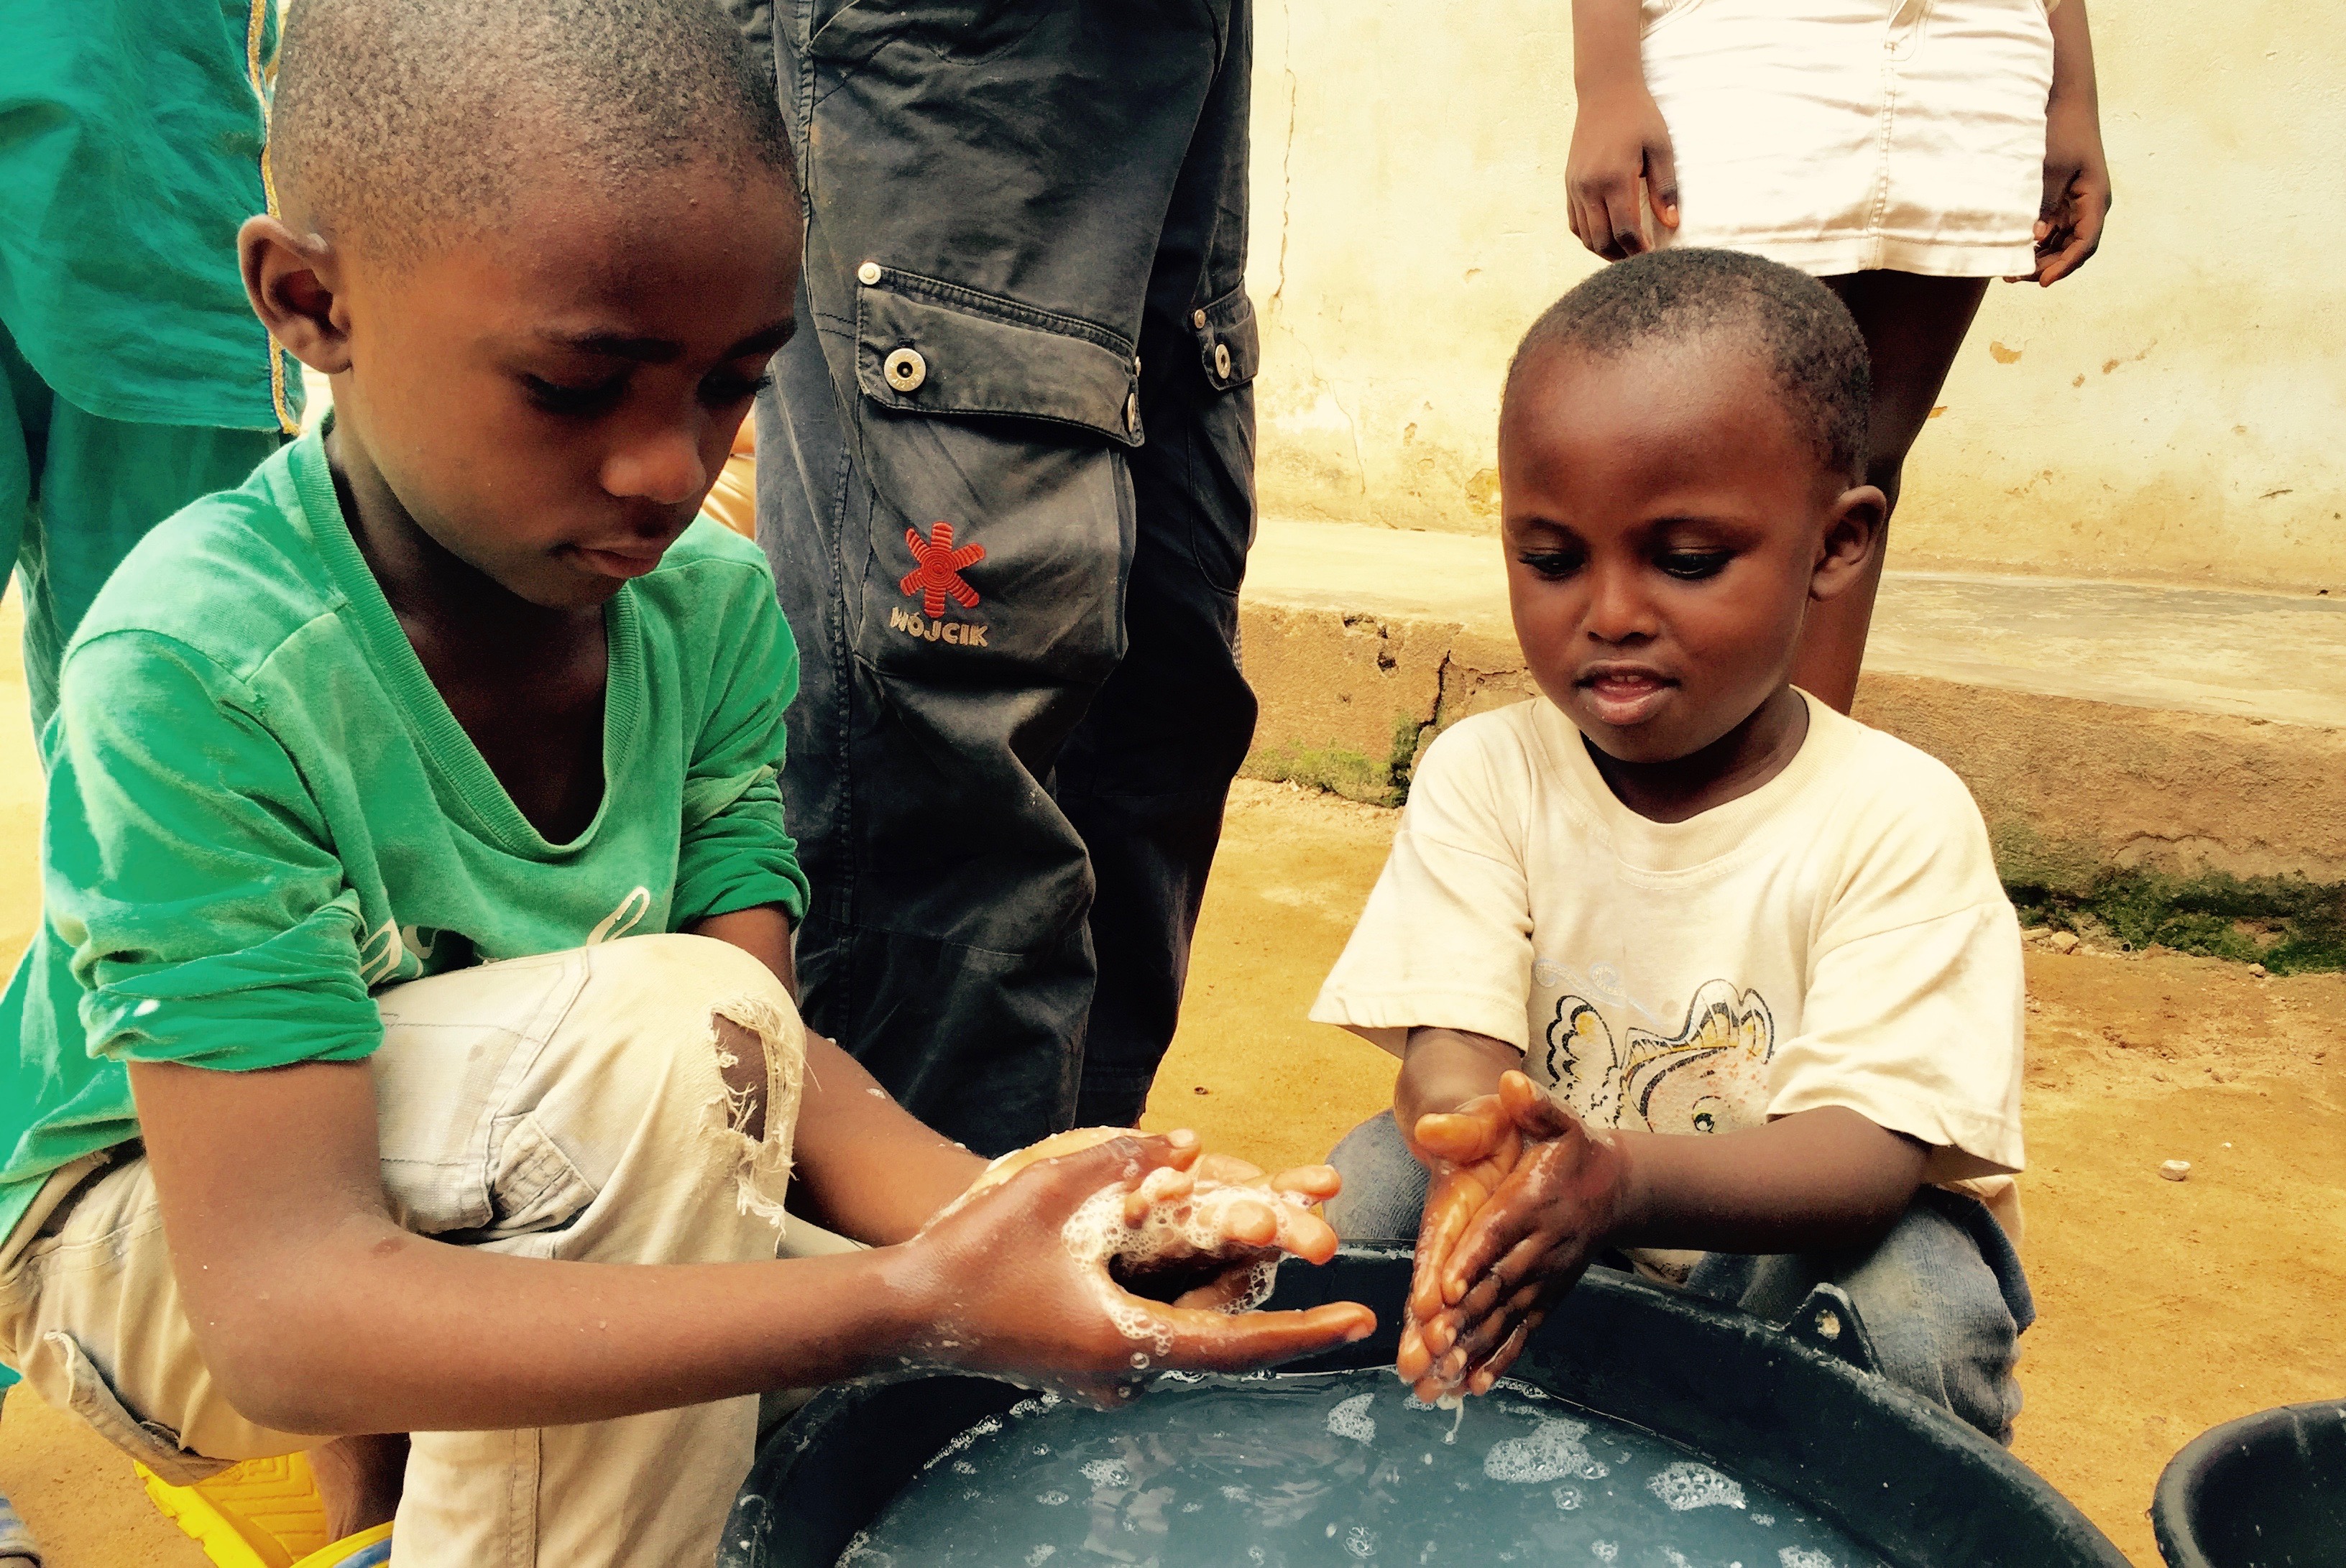 The distribution of soap in poverty-stricken regions significantly improves local hand hygiene practices. 